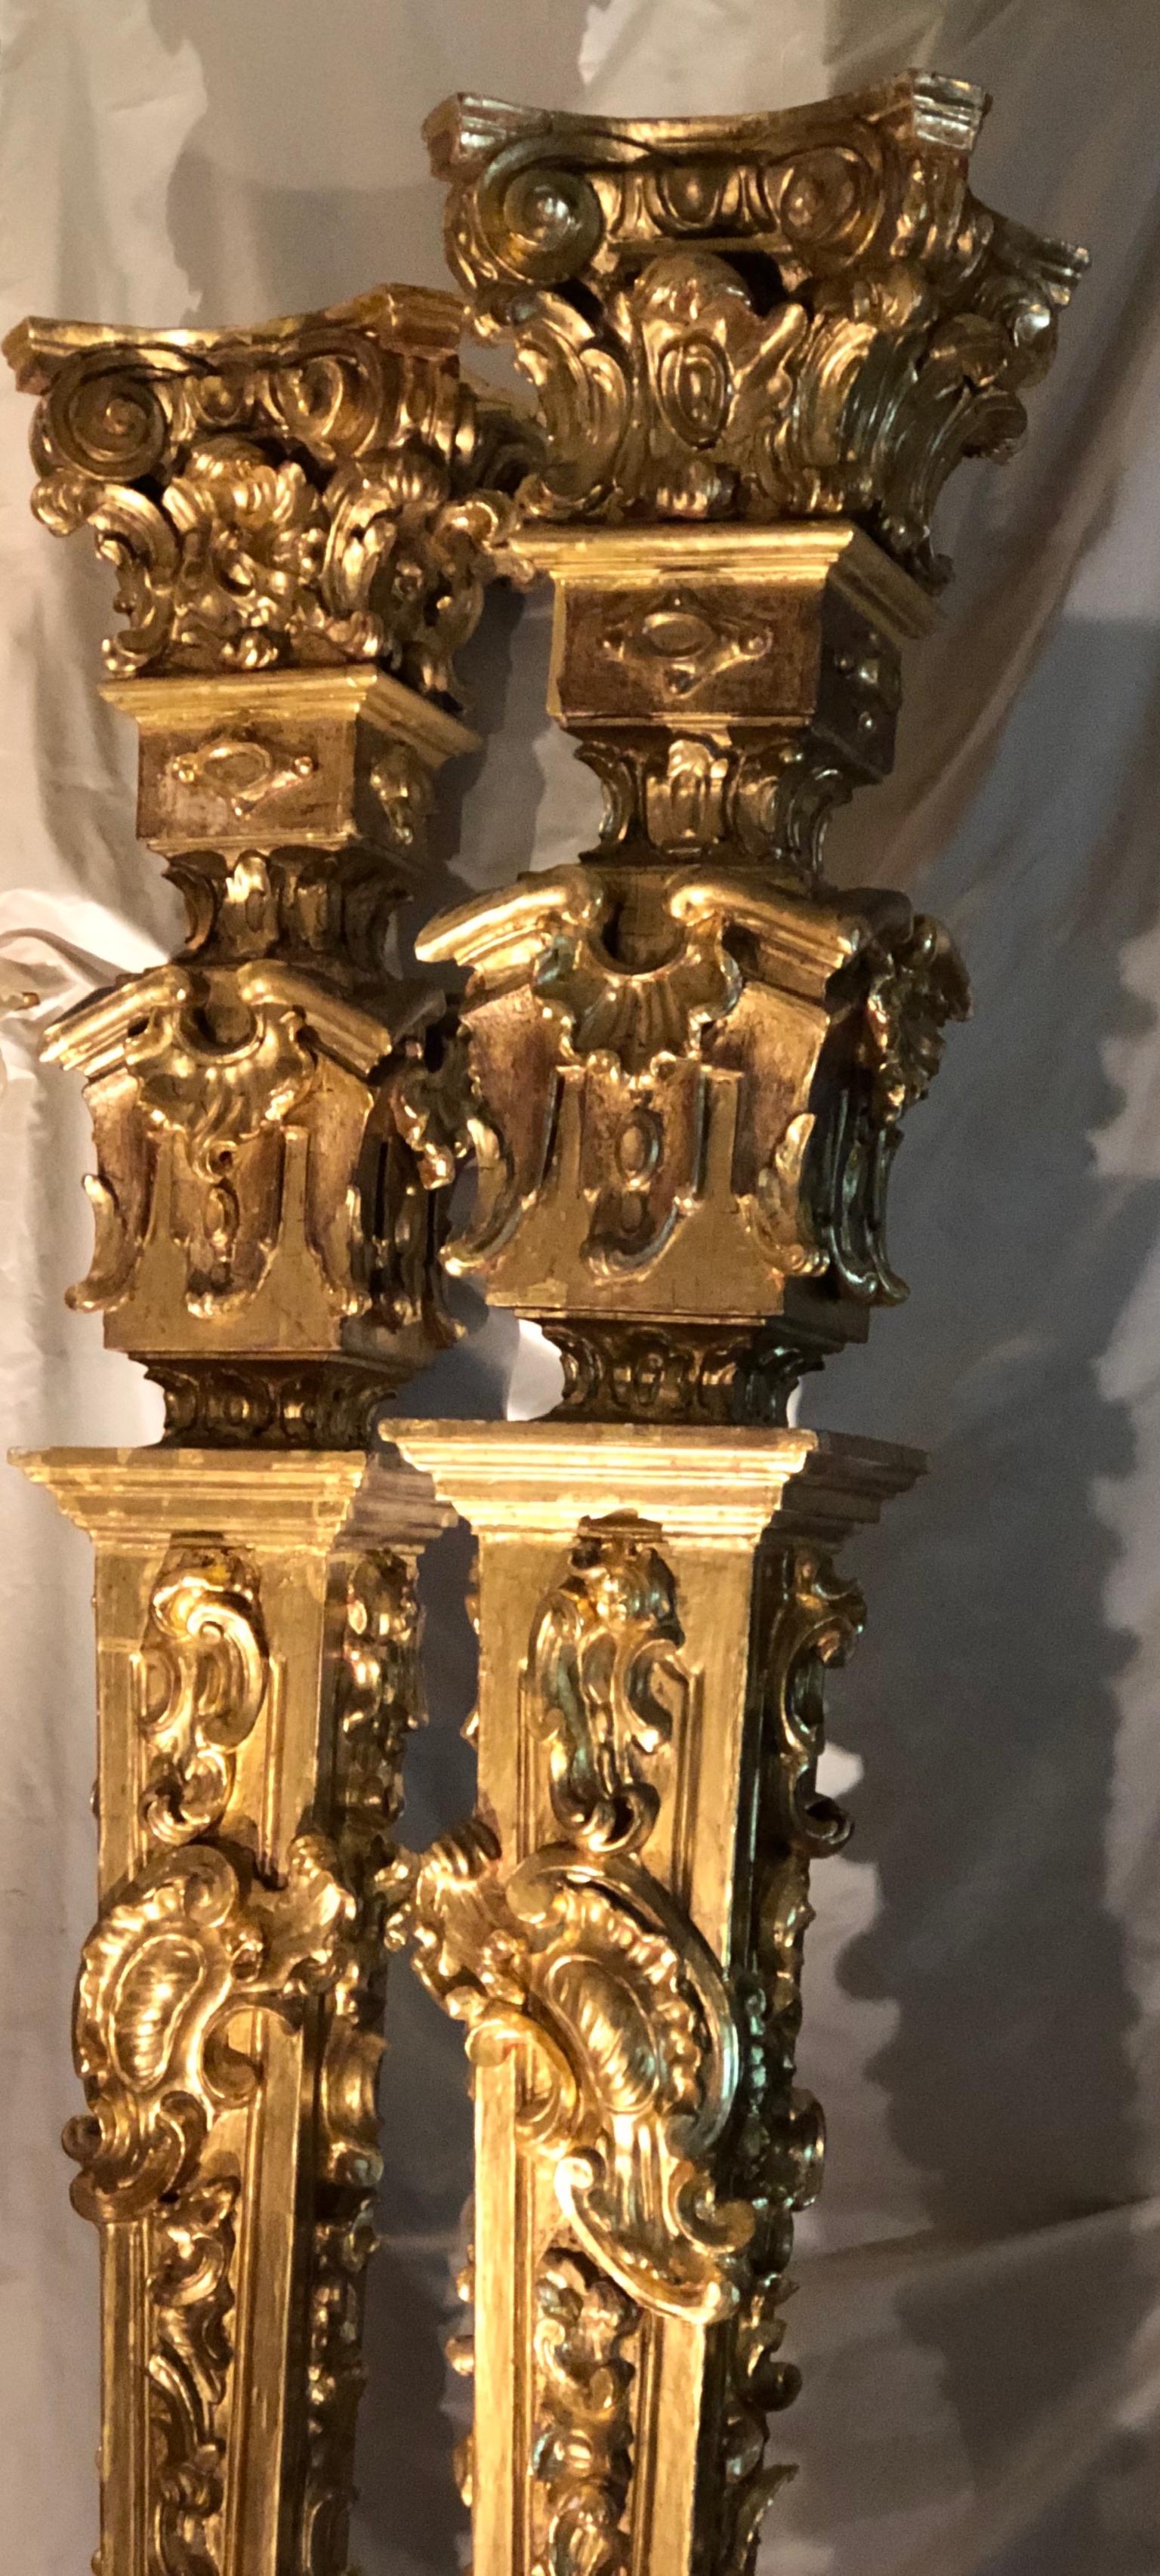 These are a (true) pair of tall Louis XV Columns/ Pedestals created by a Master Sculpteur in the mid 18th century Rococo period. They are sumptuous hand-sculpted by a master craftsman . They are creations which, in the eye of a Paleophile of the